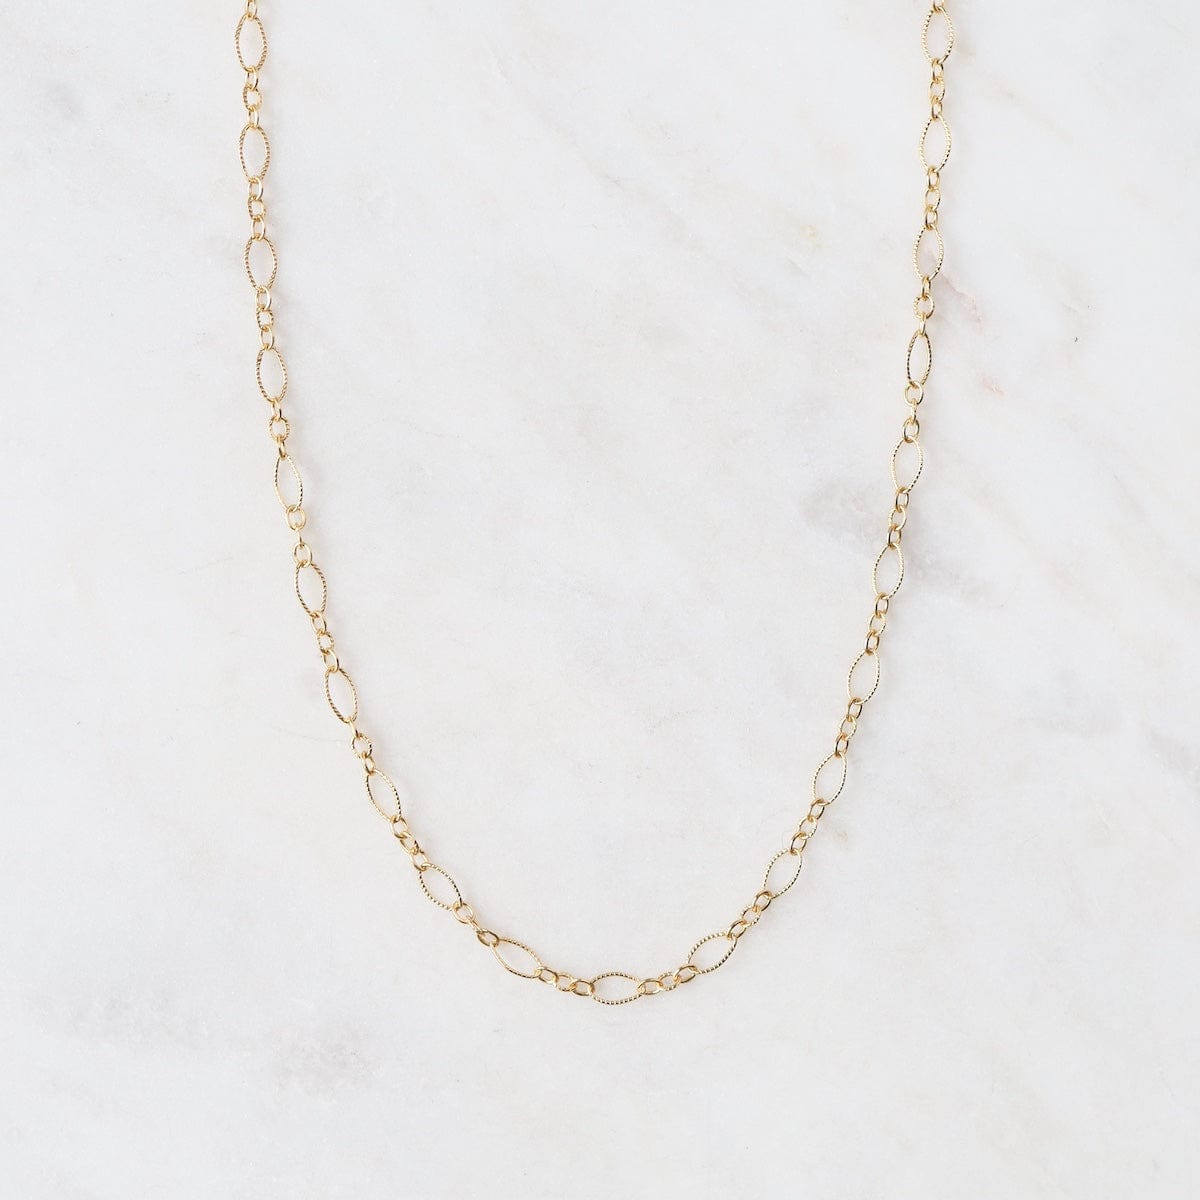 NKL-GF 18" gold Filled Oval Long & Short Chain w/ Lines 4